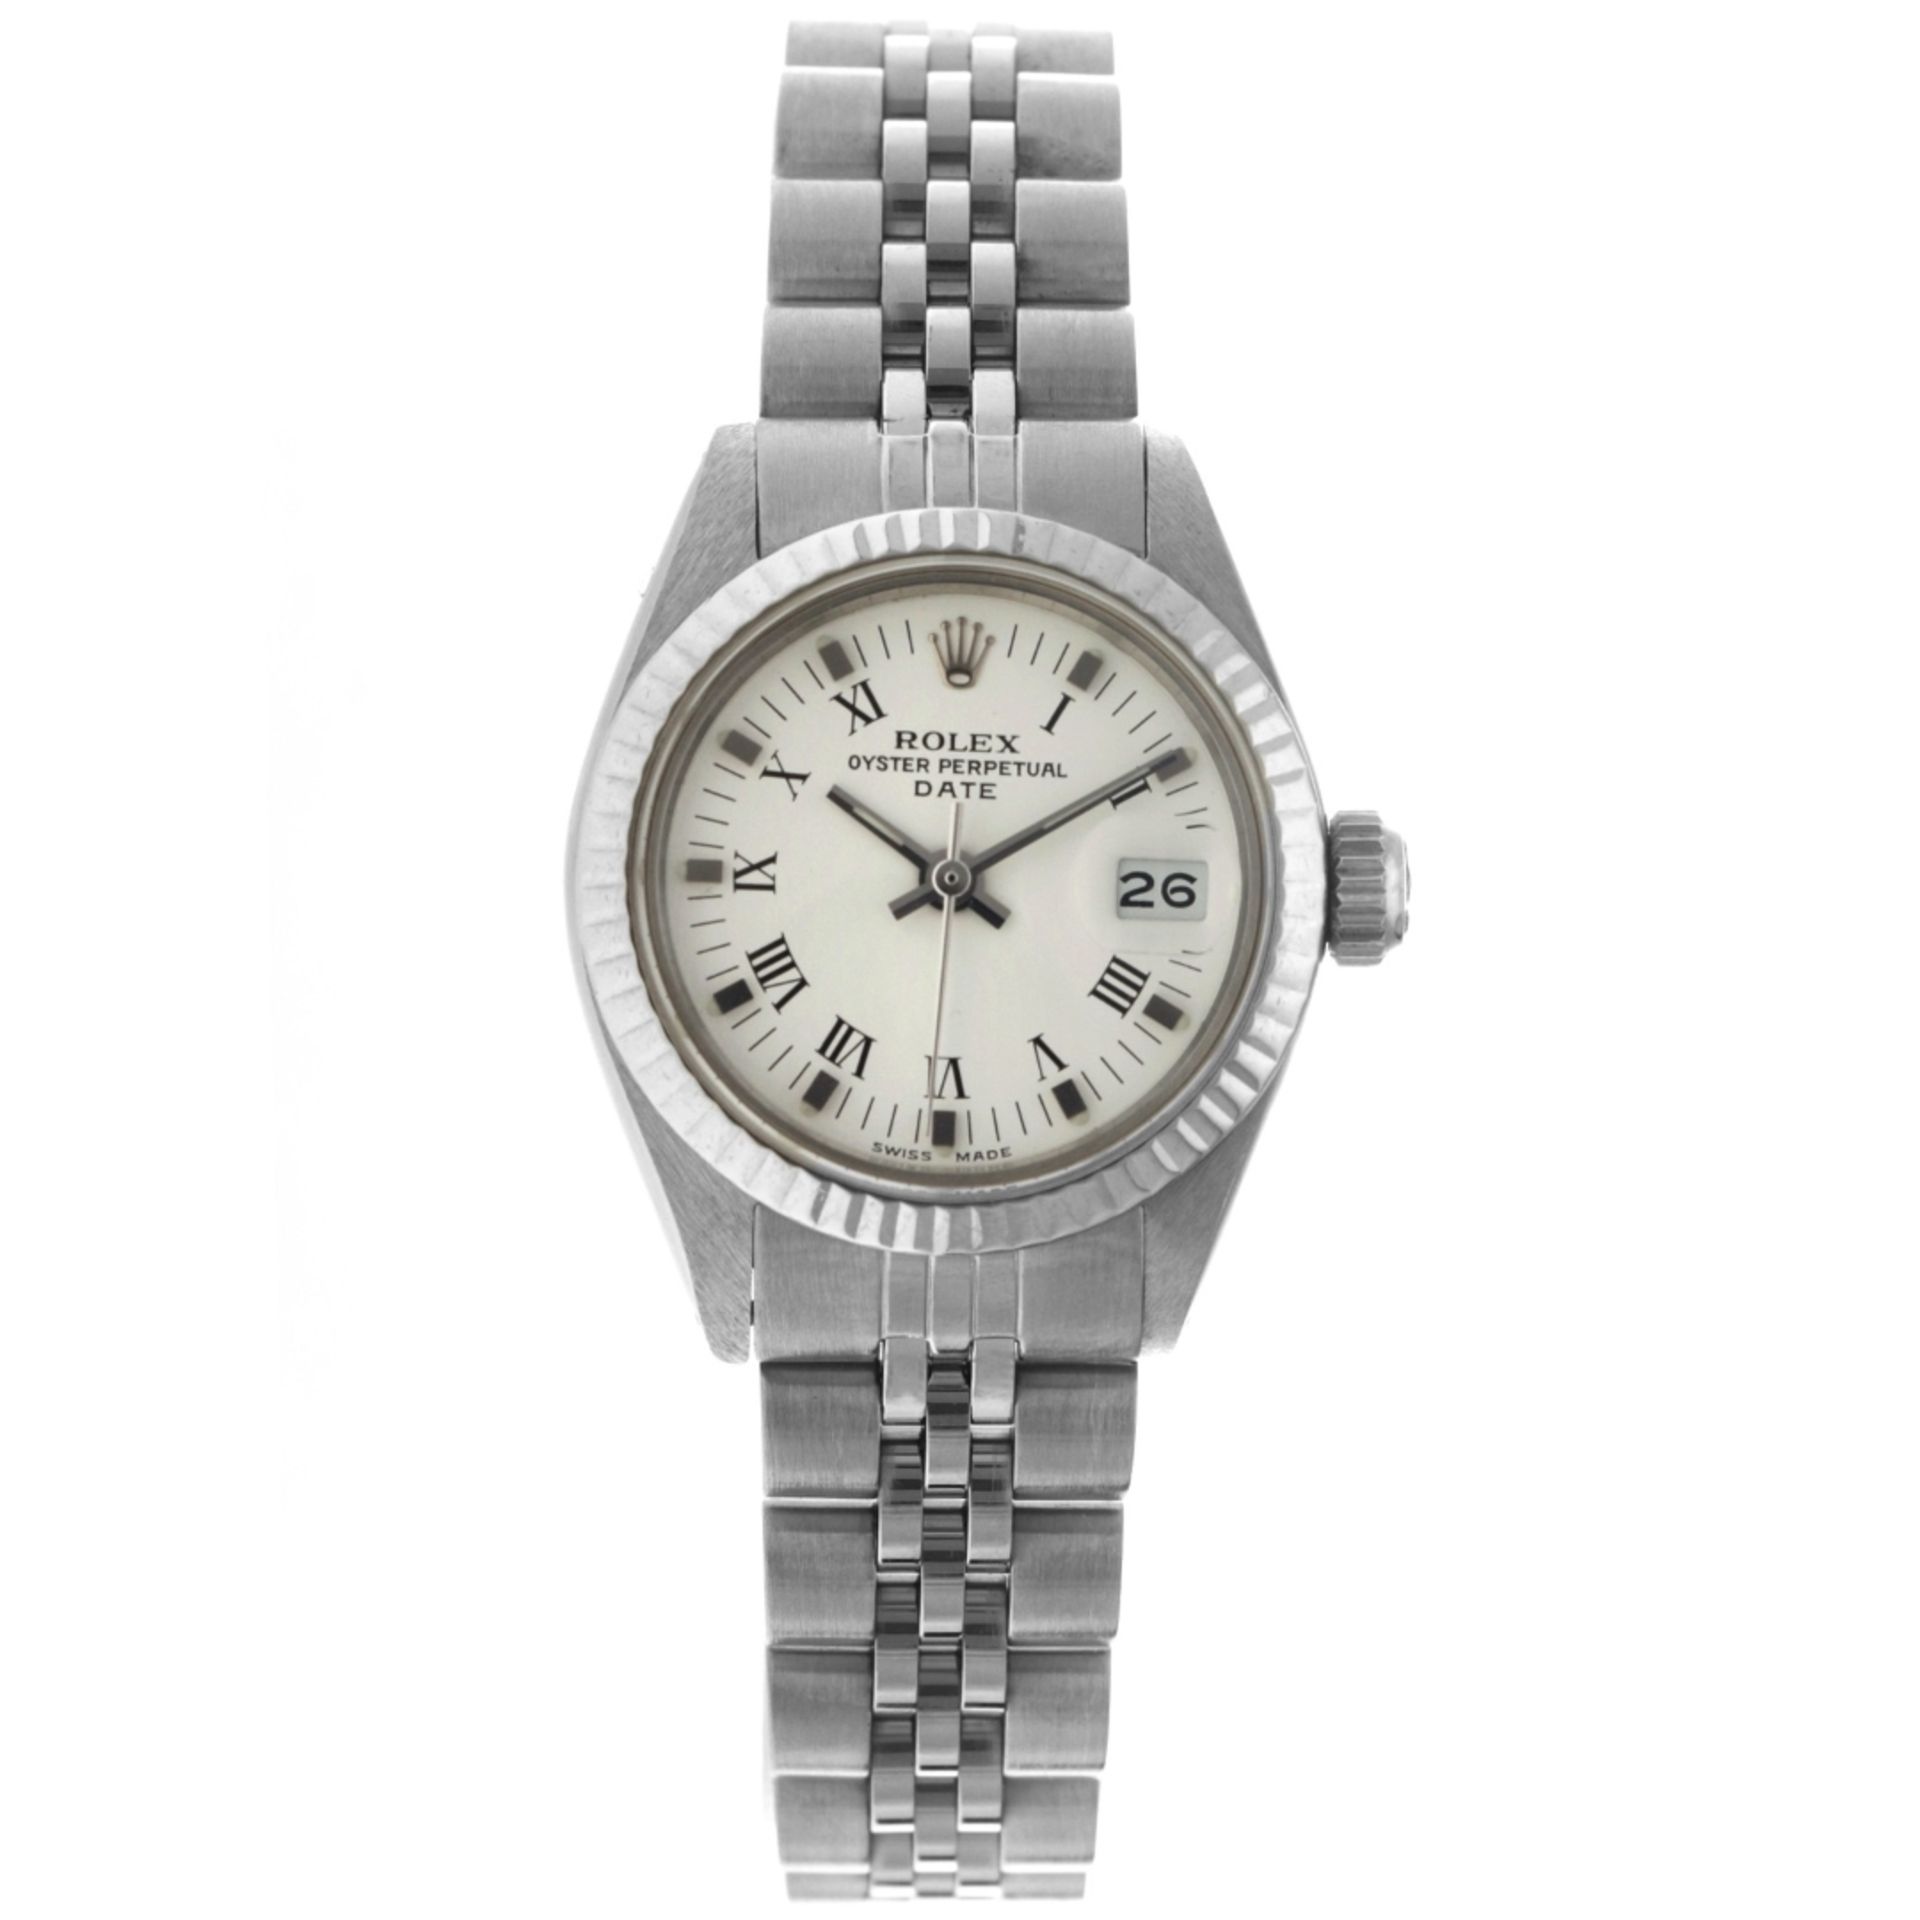 No Reserve - Rolex Lady Date 6917 - Ladies watch - approx. 1974.